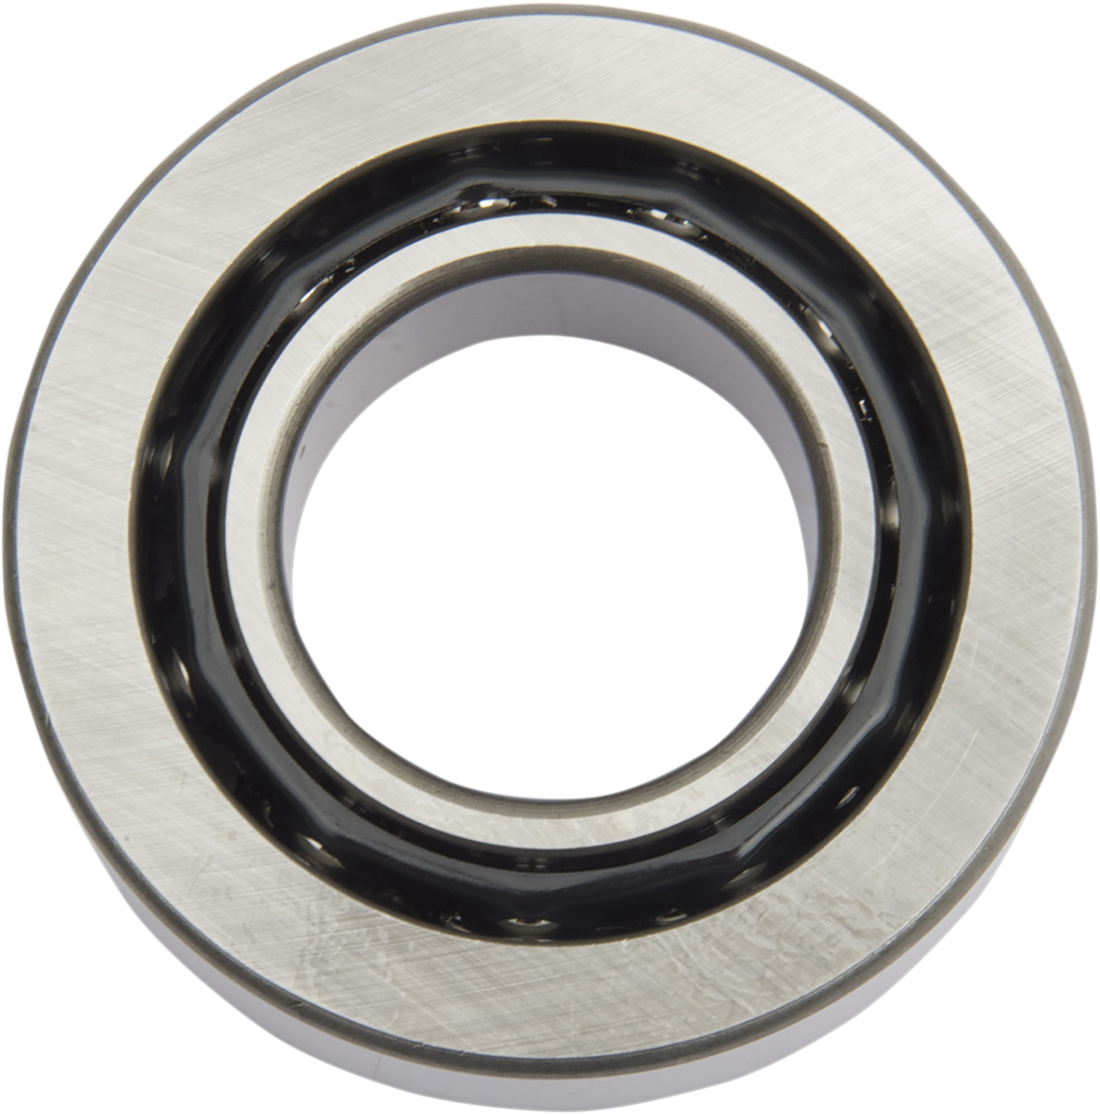 1132-0919 - EASTERN MOTORCYCLE PARTS Bearing - 37906-11 A-37906-11